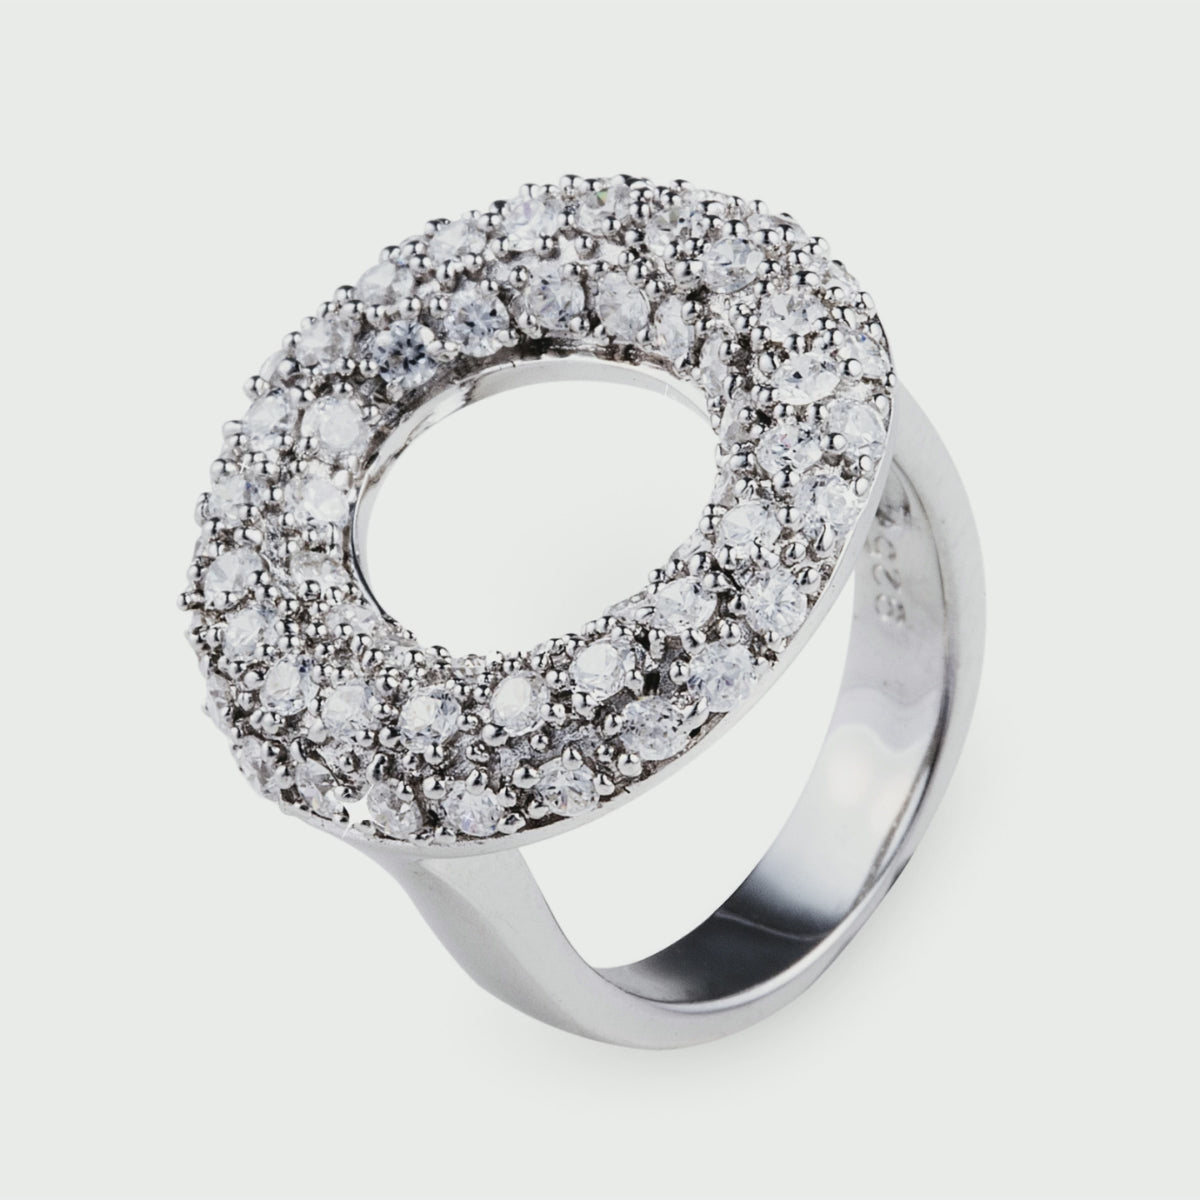 The elegant Sparkly Lana Ring features a classic 'O' shape encrusted with cubic zirconia stones in a pave setting. This beautiful ring is made of 925 sterling silver. Jewellery by Bellagio & Co. Worldwide shipping.